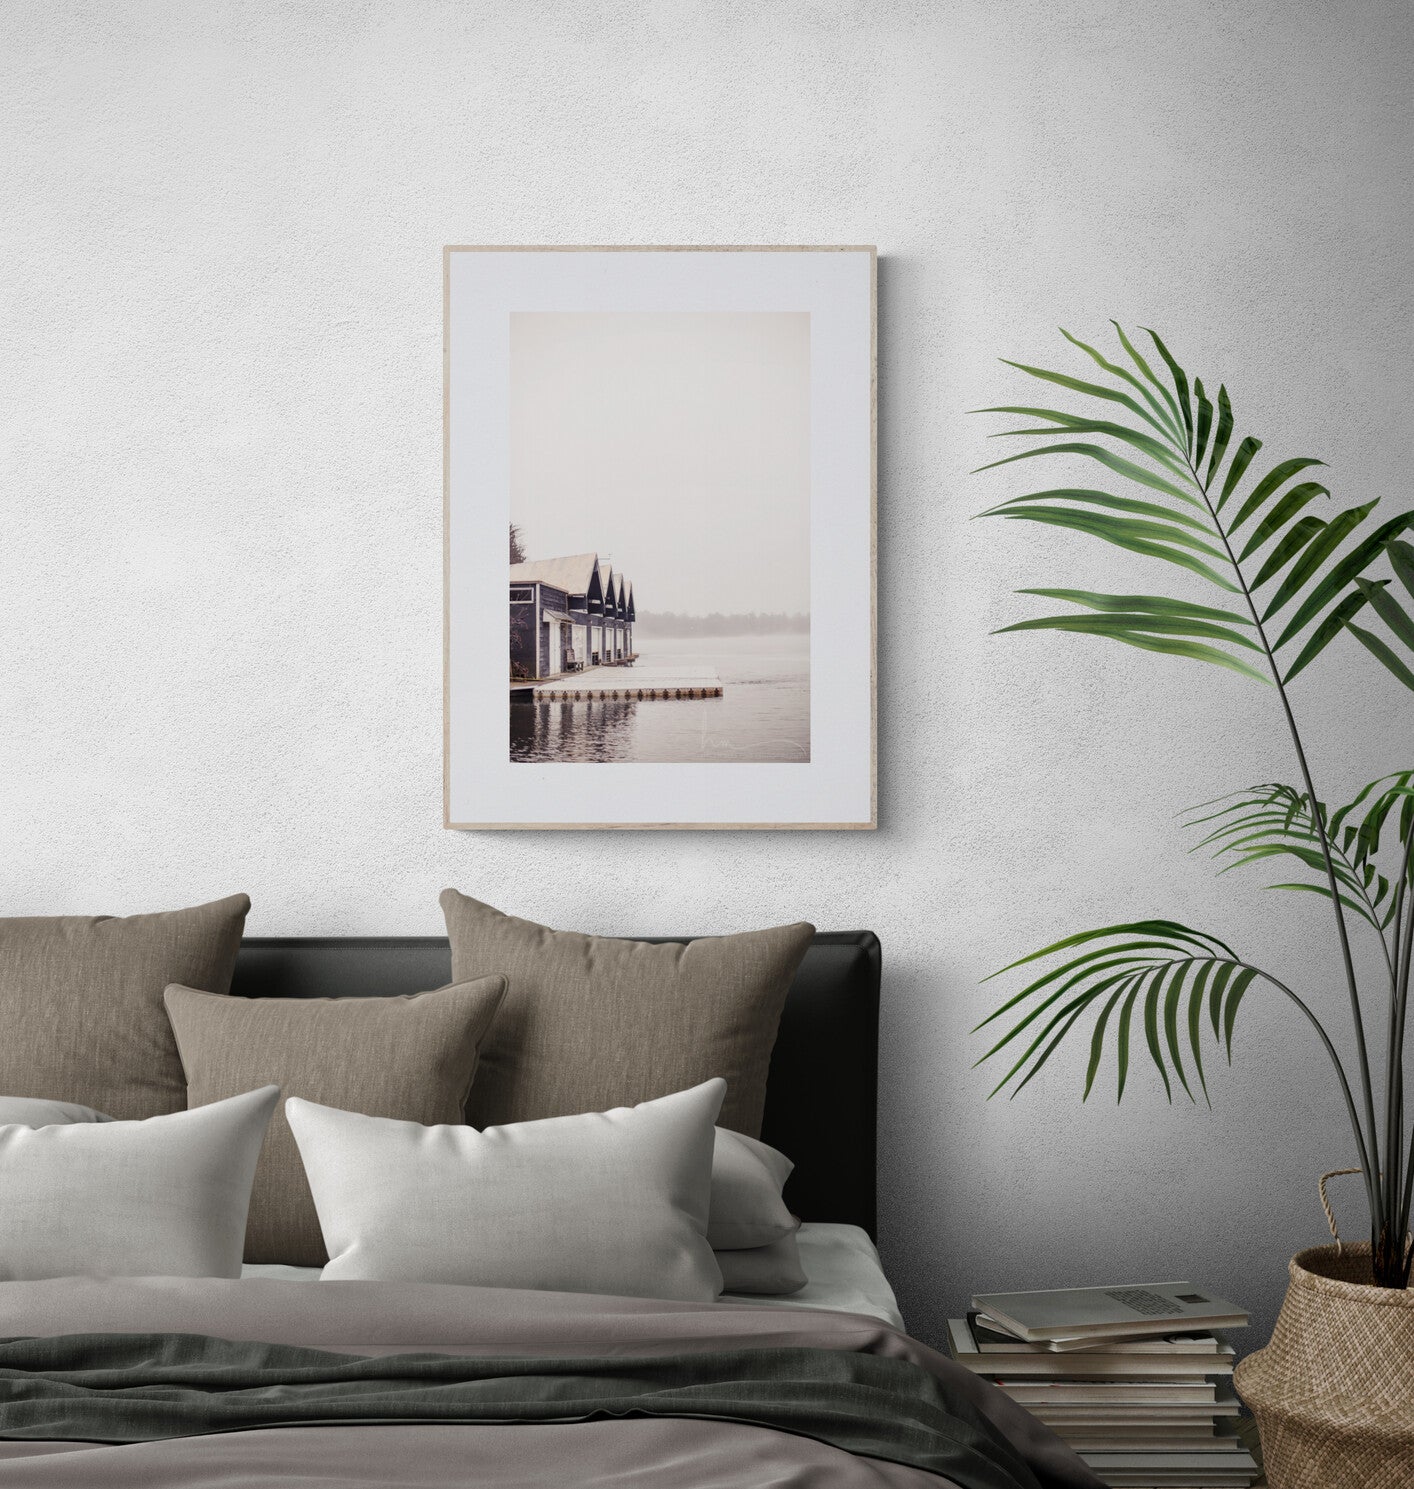 boathouse on a lake photograph print in a bedroom as wall art